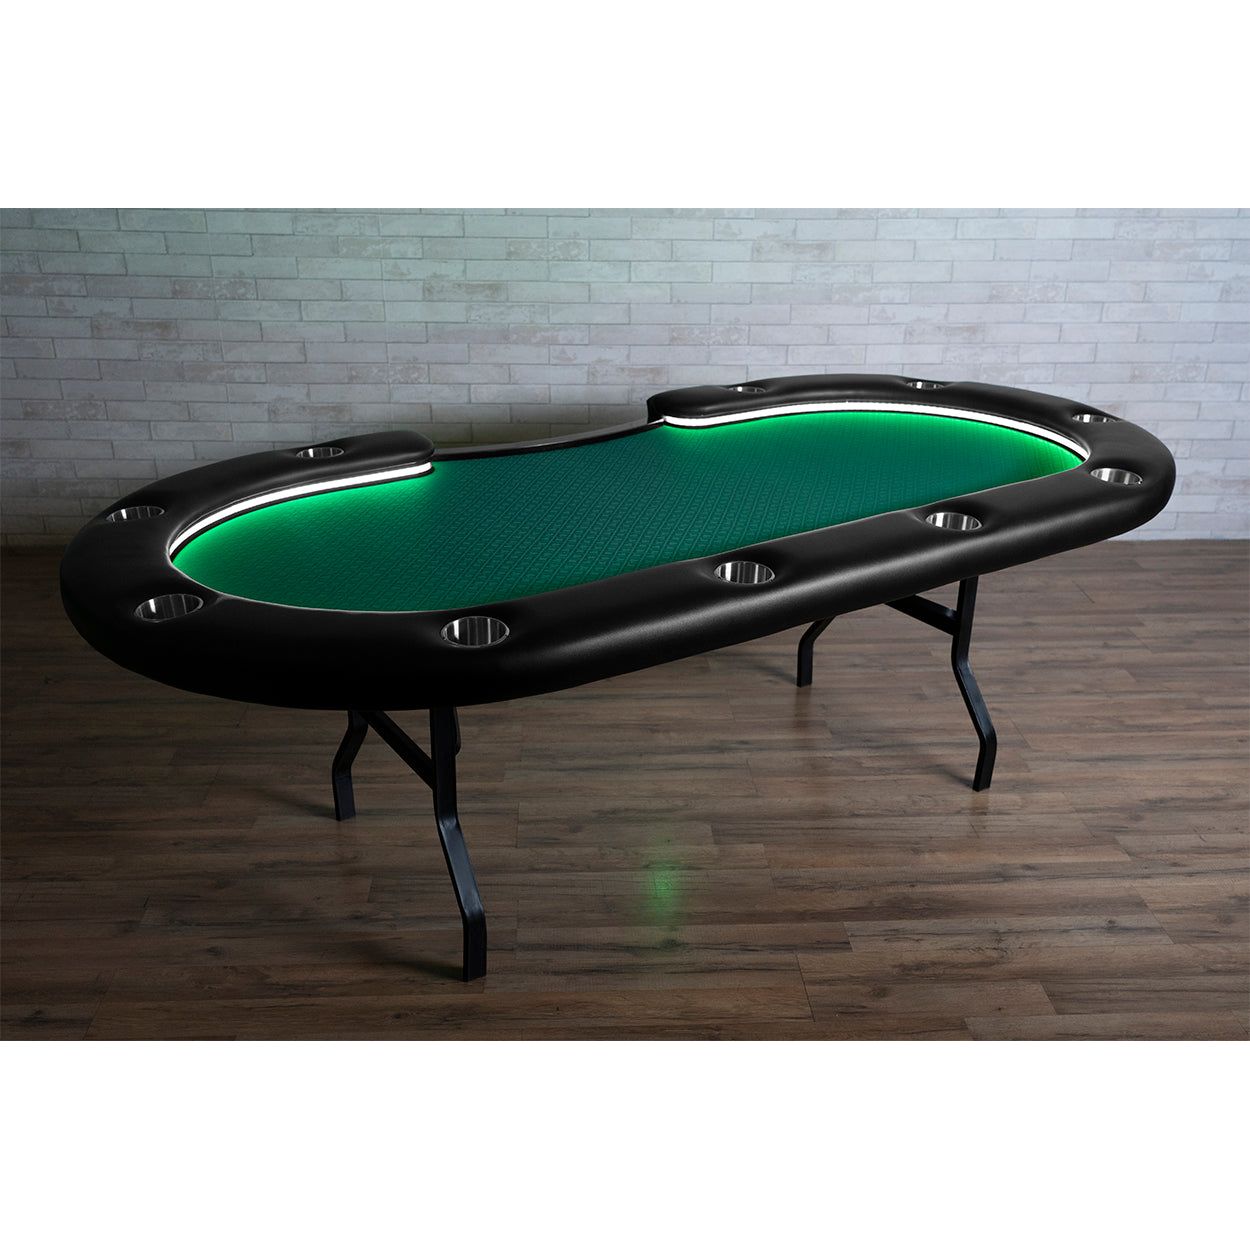 Folding poker table with LEDs, sturdy leg construction, and a green game top.